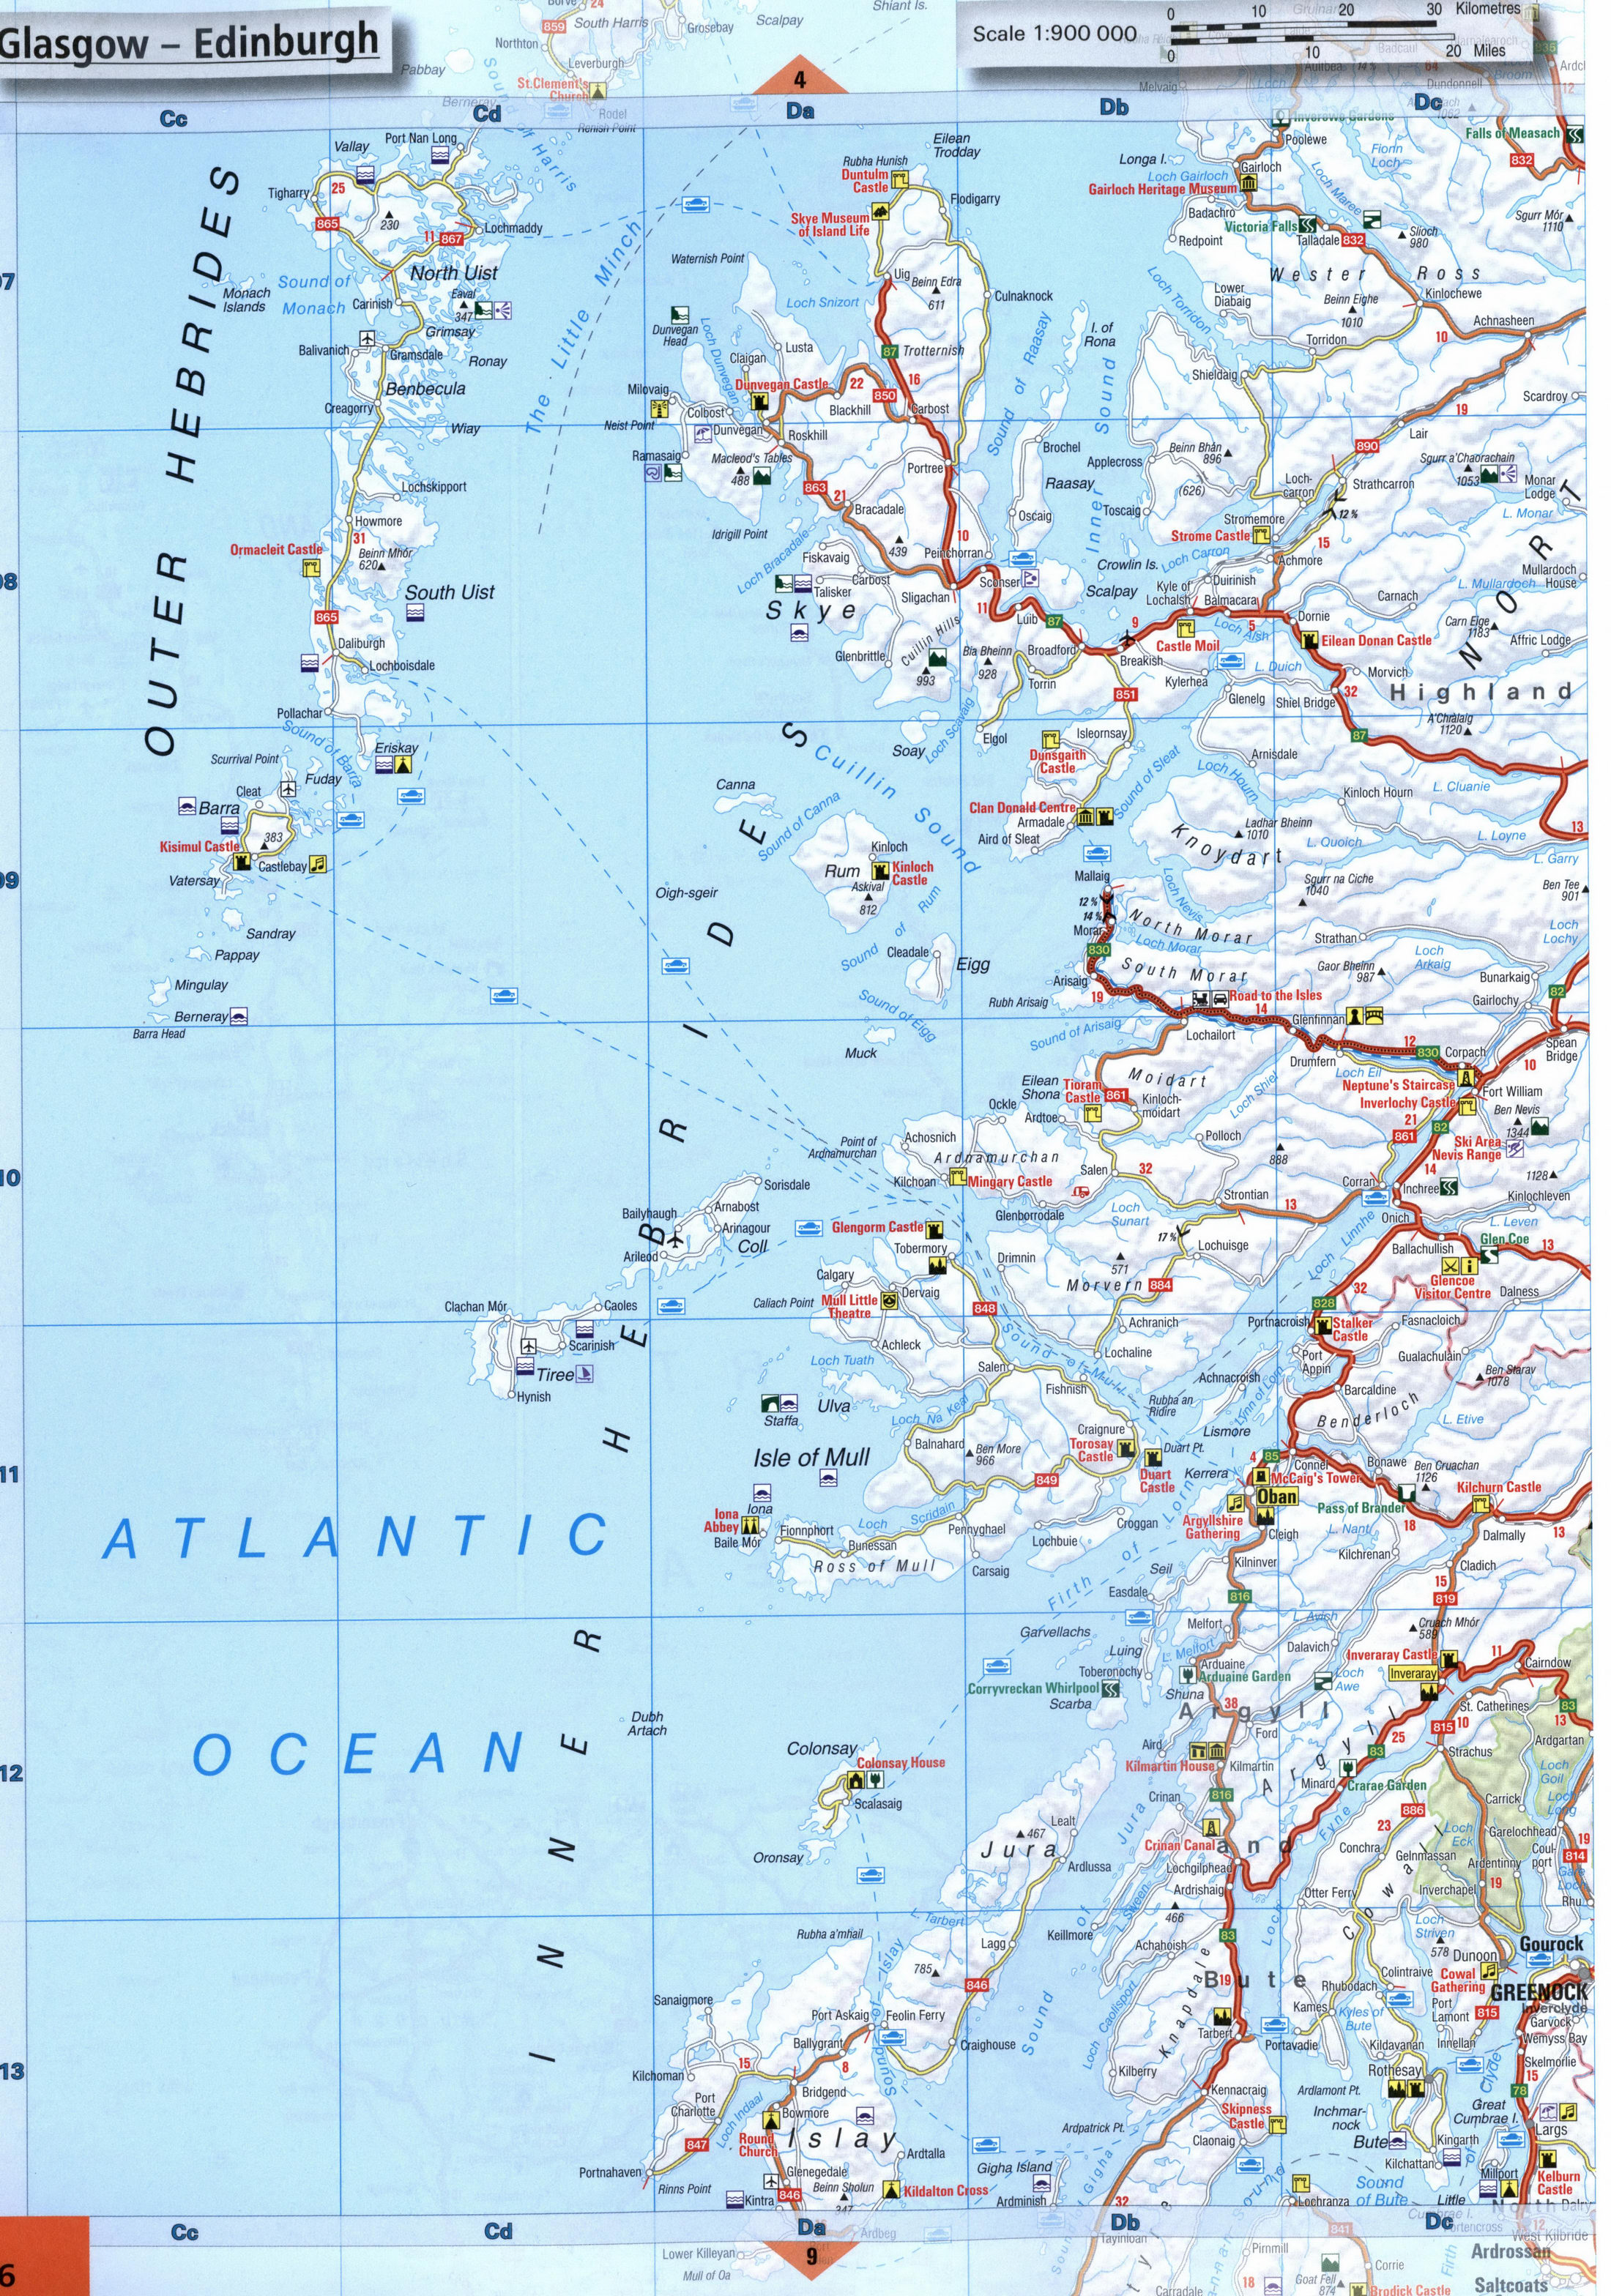 map of Outer Hebrides and Inner Hebrides Islands in Scotland